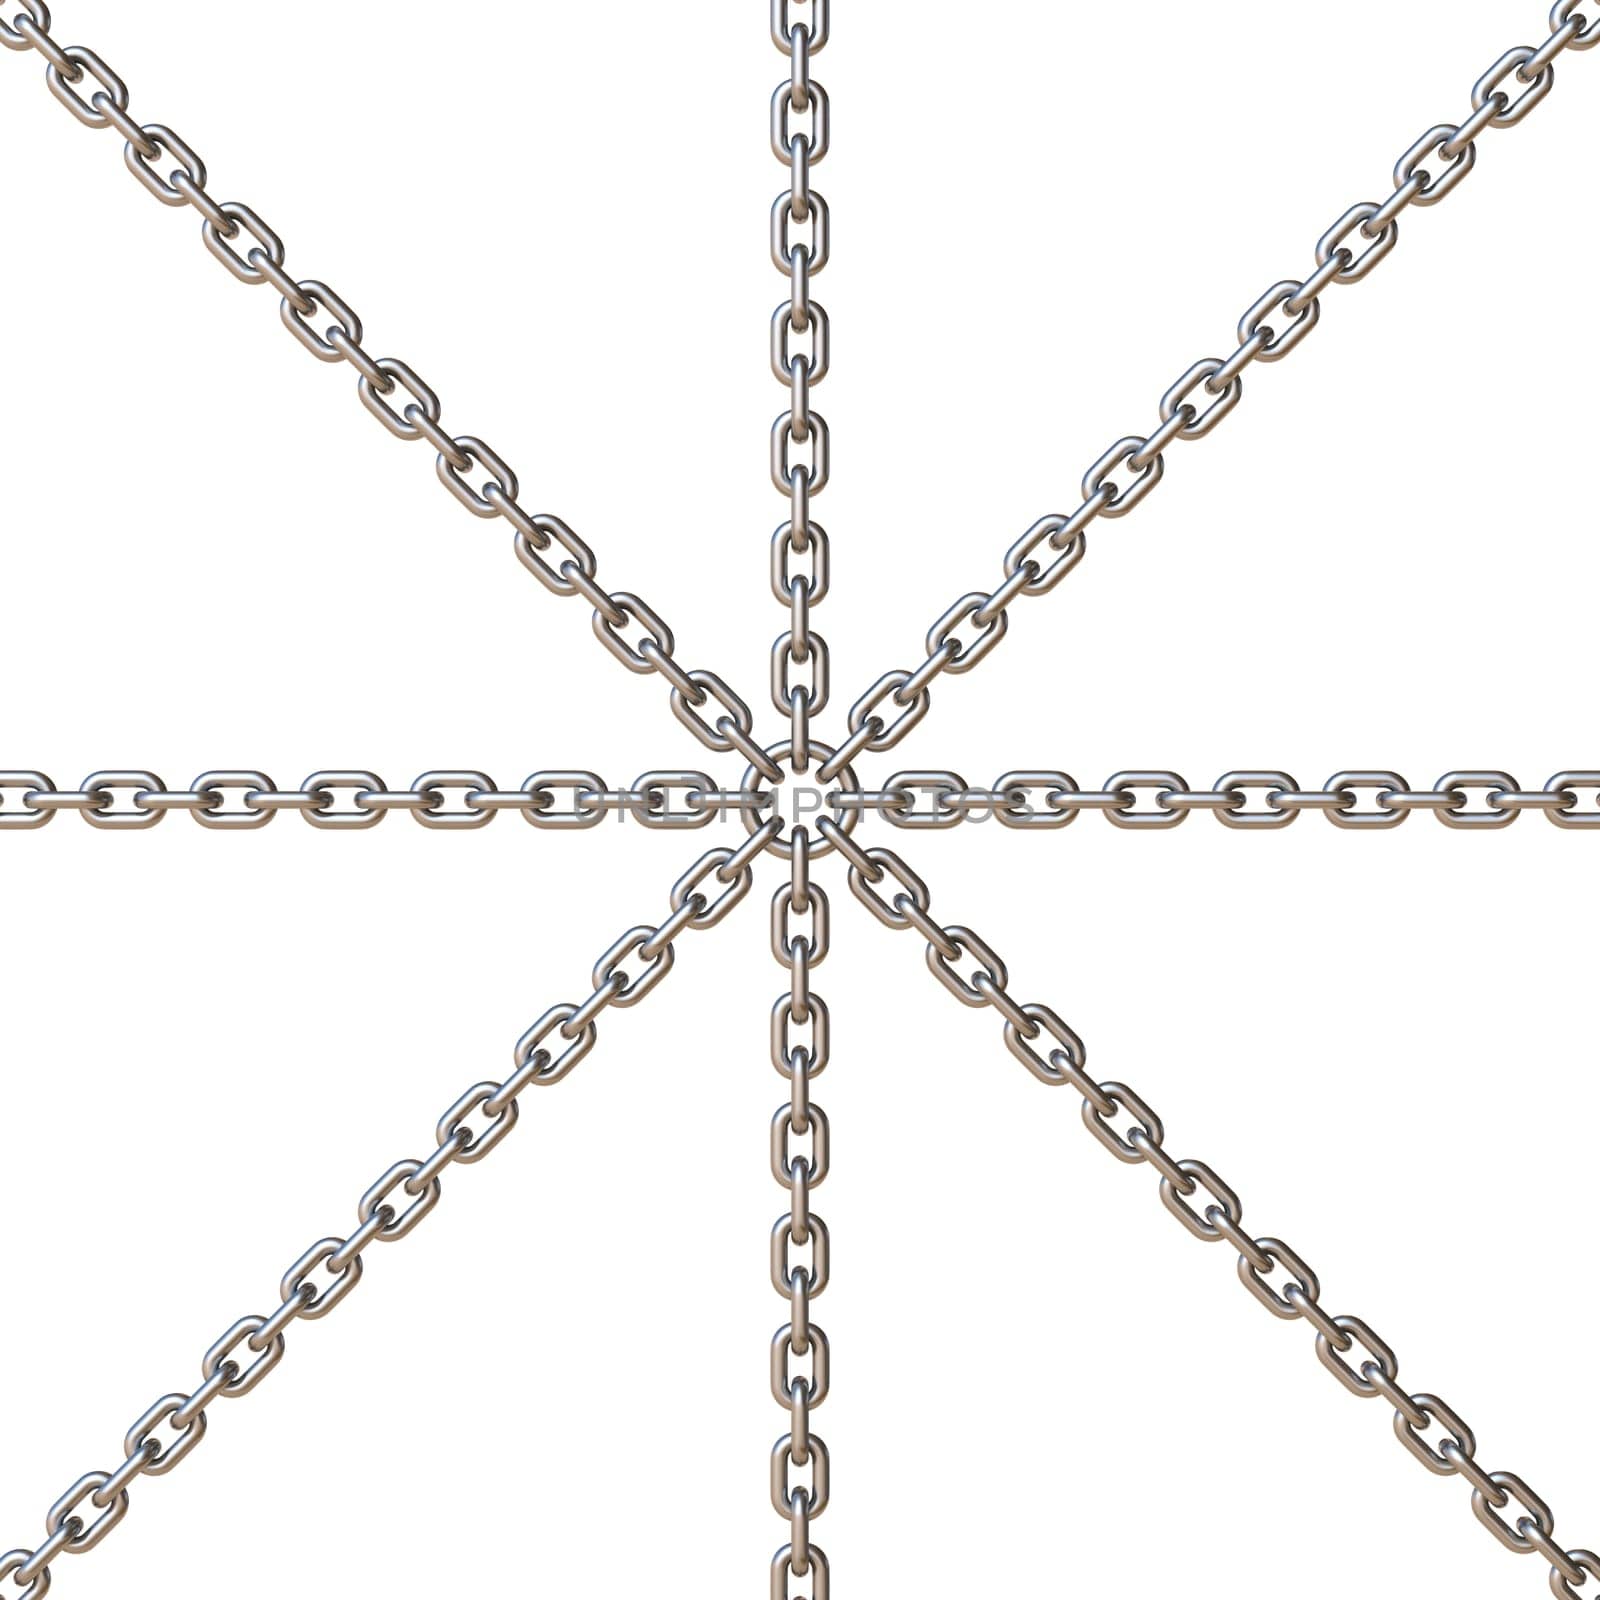 Four crossing steel chains 3D rendering illustration isolated on white background